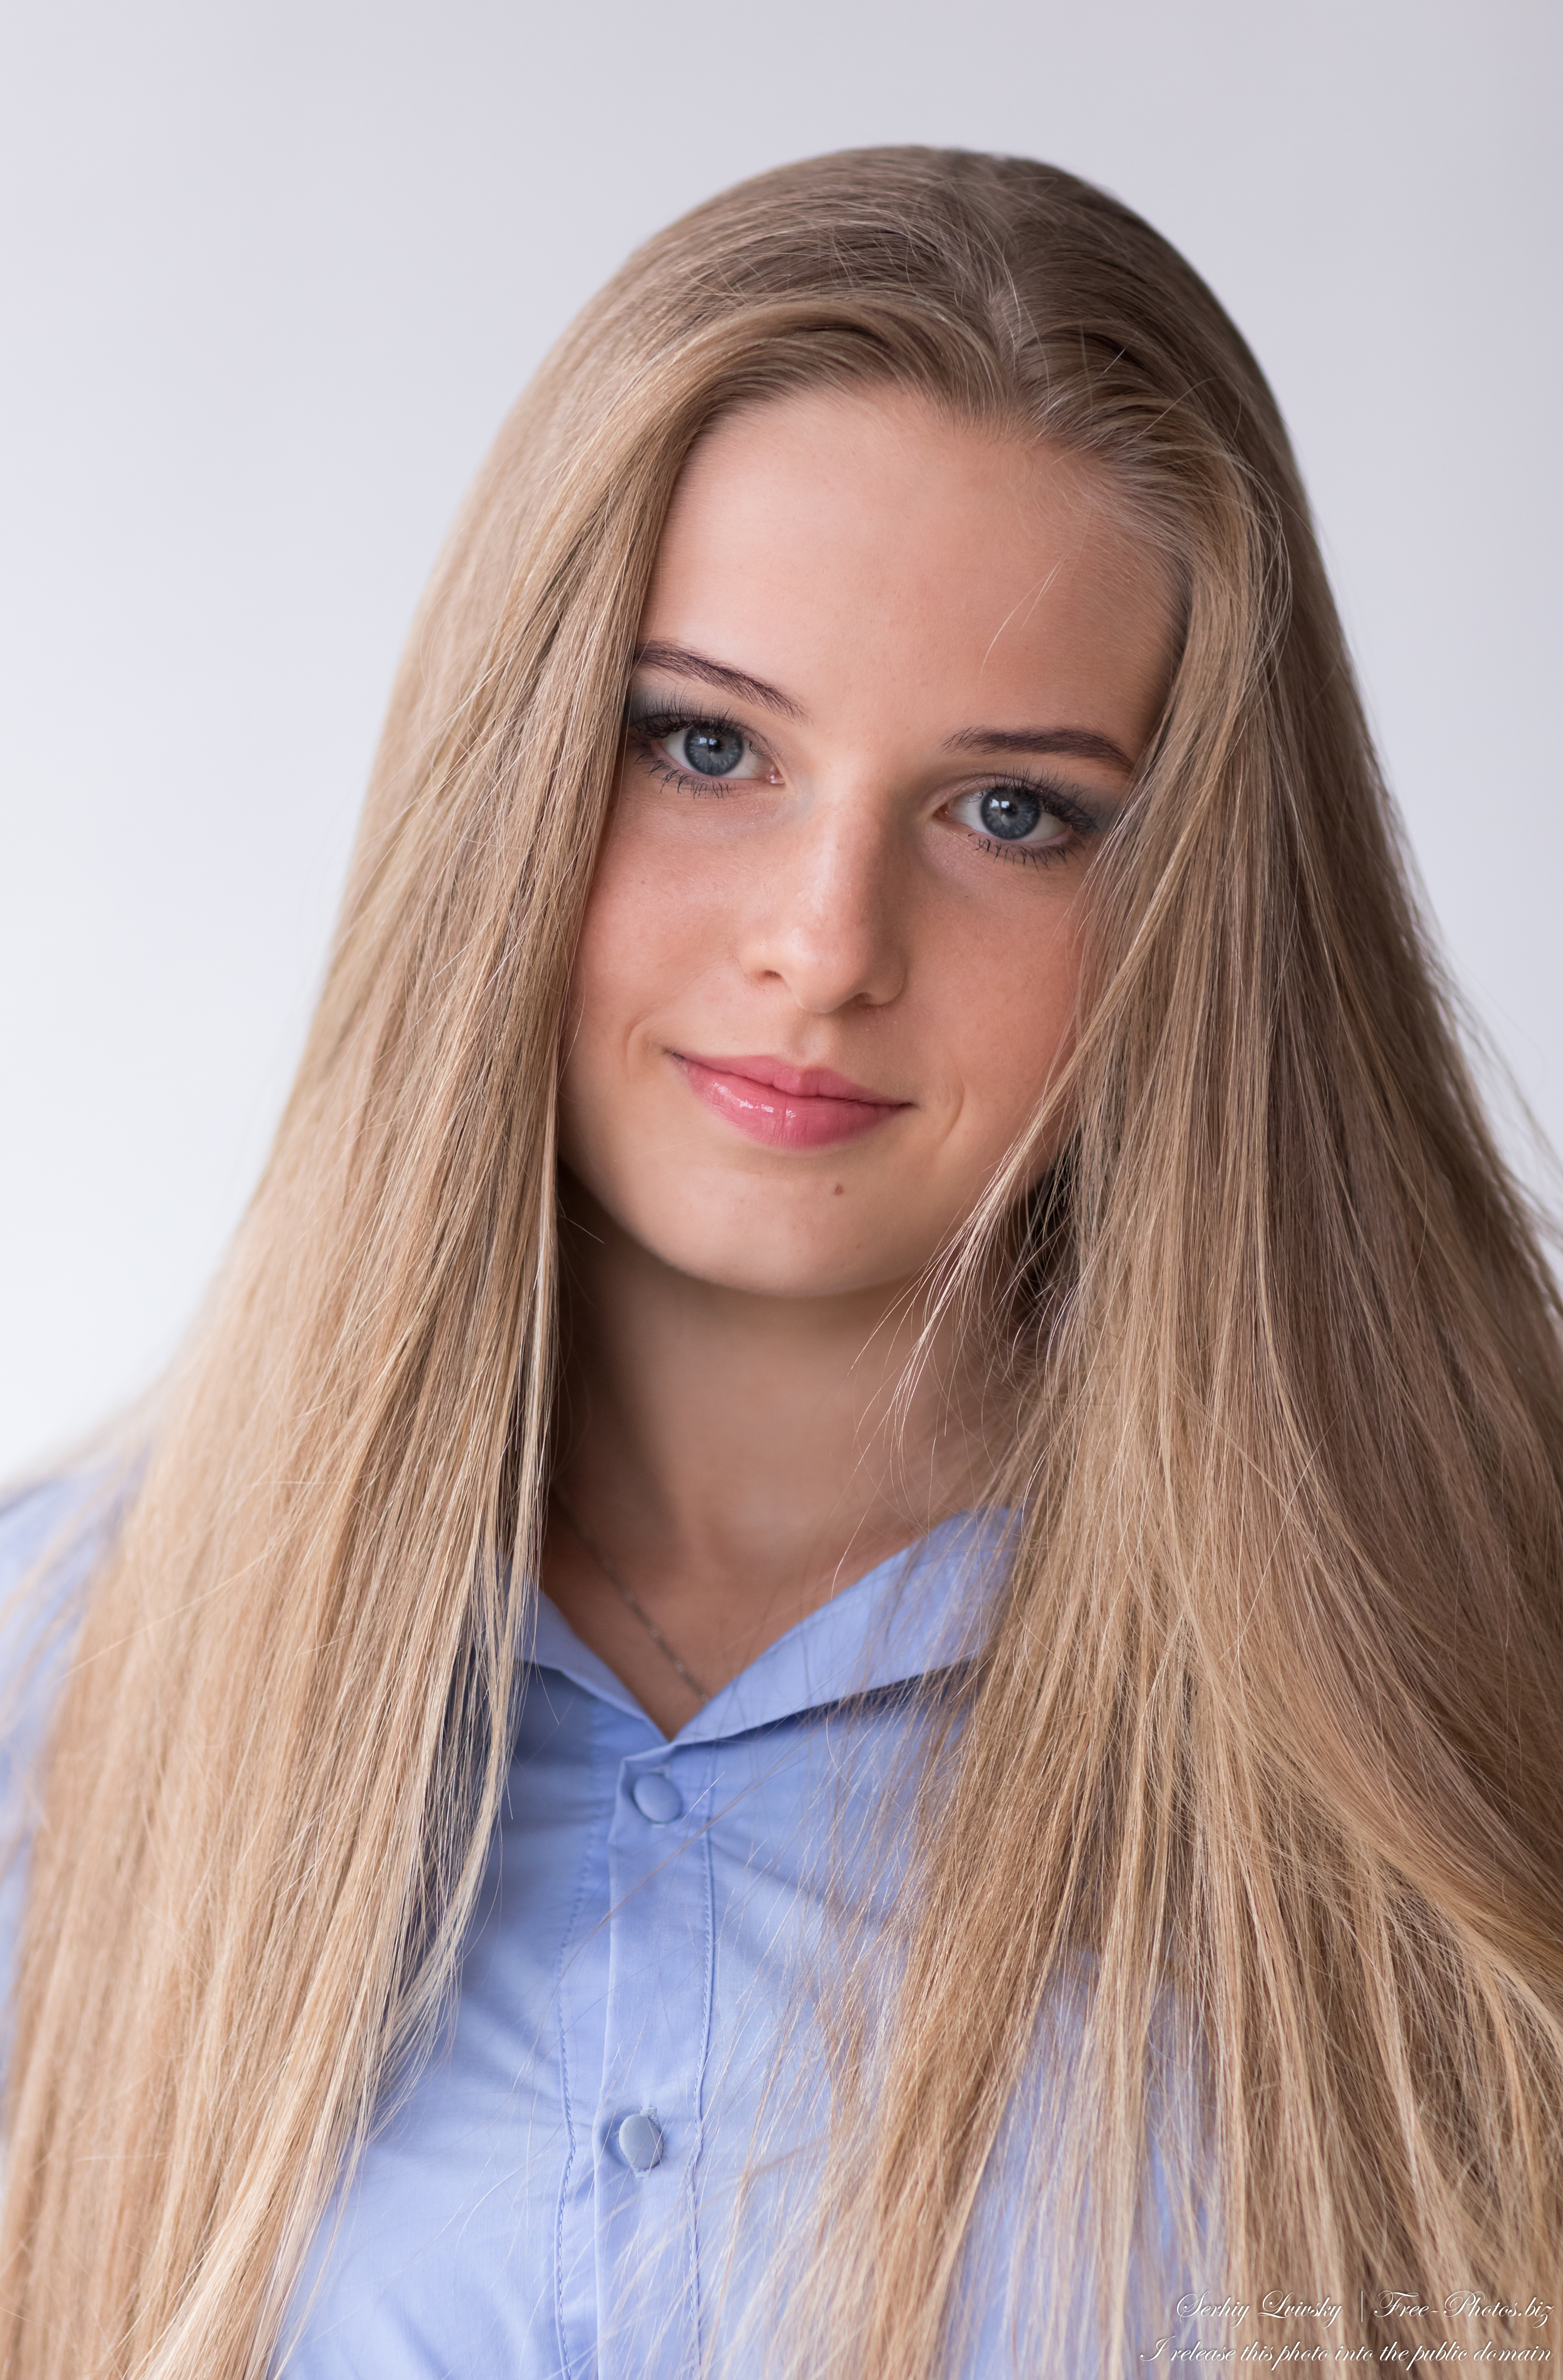 diana_an_18-year-old_natural_blonde_girl_photographed_by_serhiy_lvivsky_in_aug_2020_09